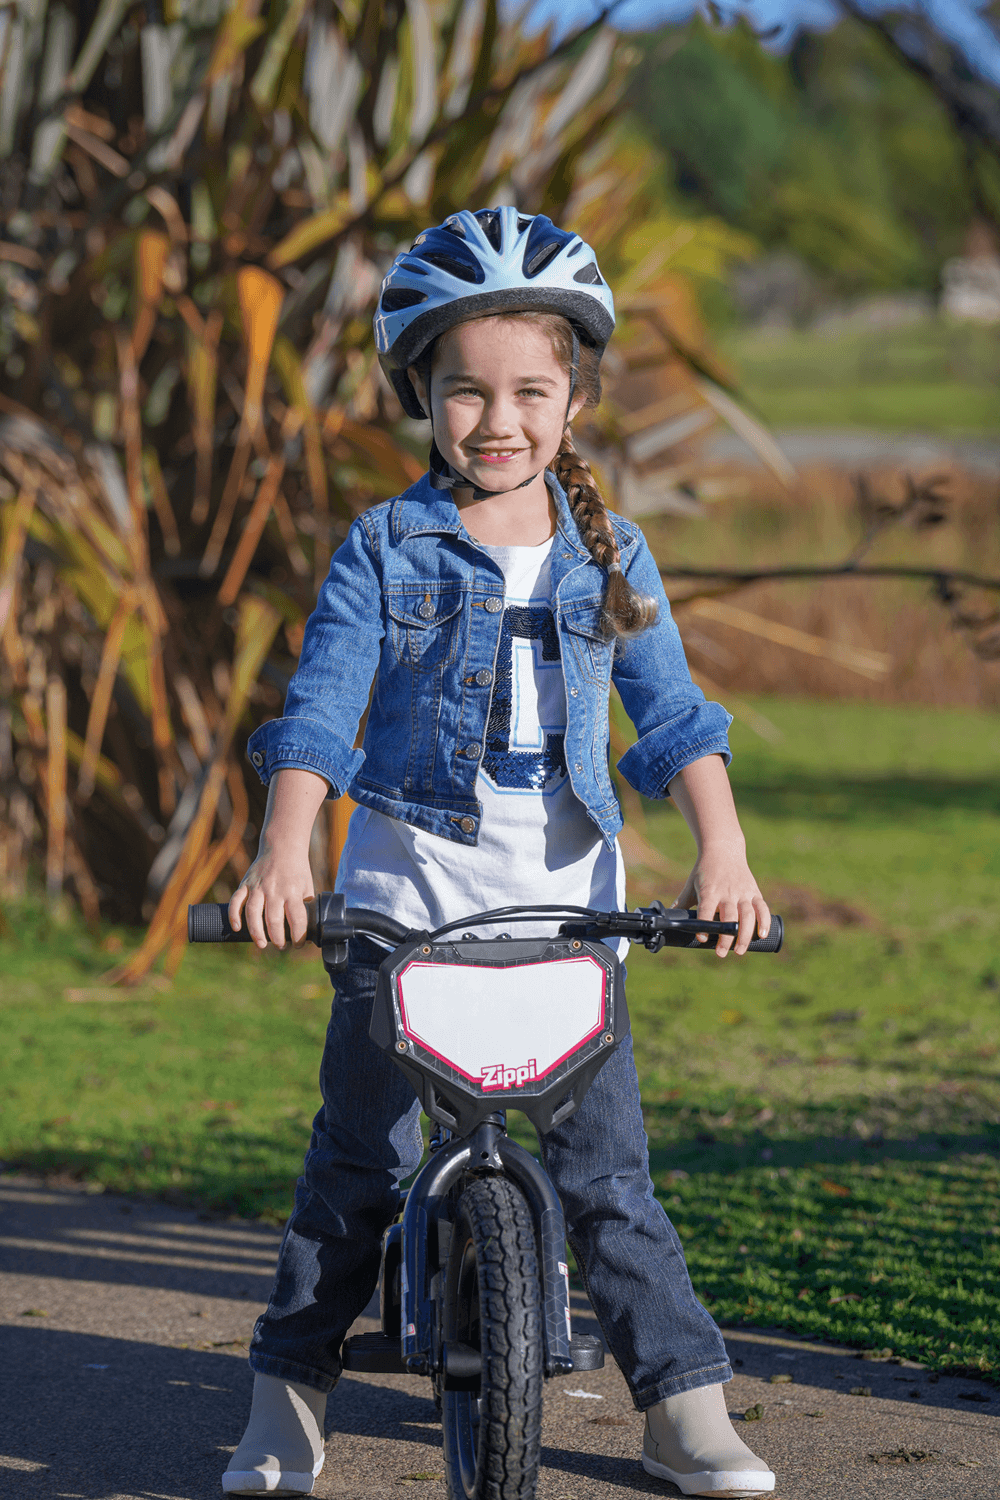 image of a young girl riding an electric balance bike